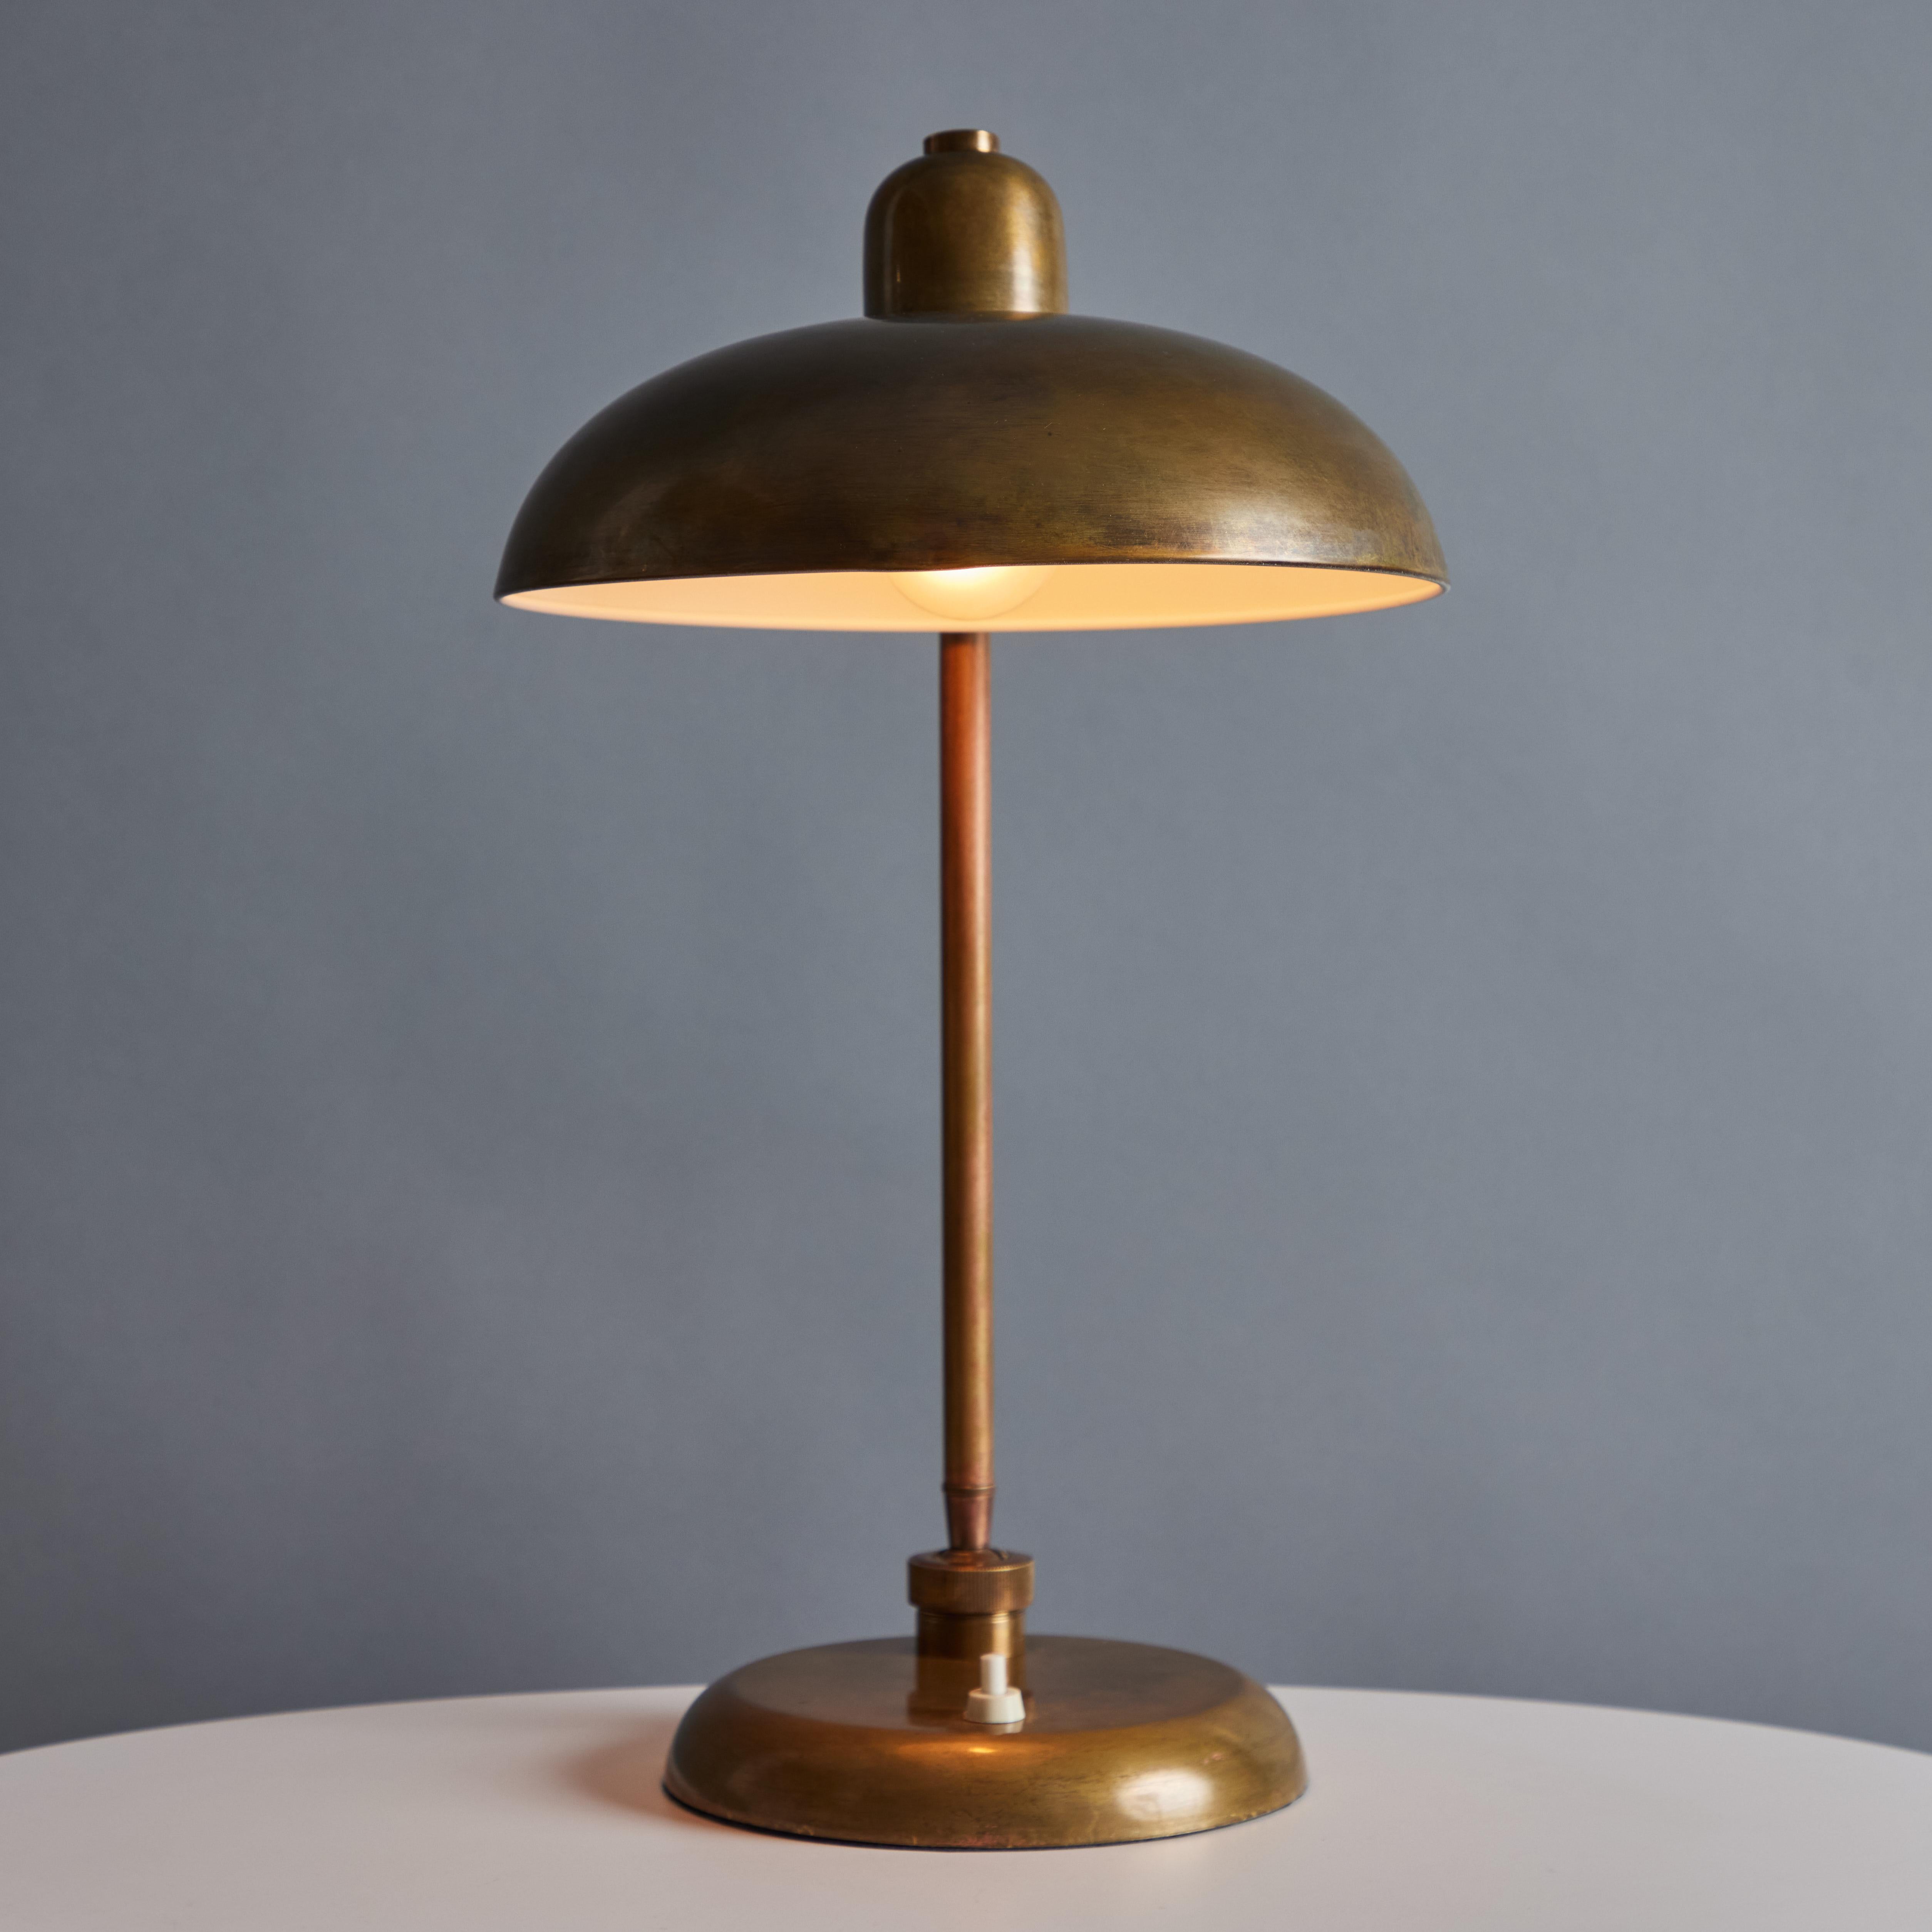 1940s Giovanni Michelucci Brass Ministerial Table Lamp for Lariolux For Sale 6